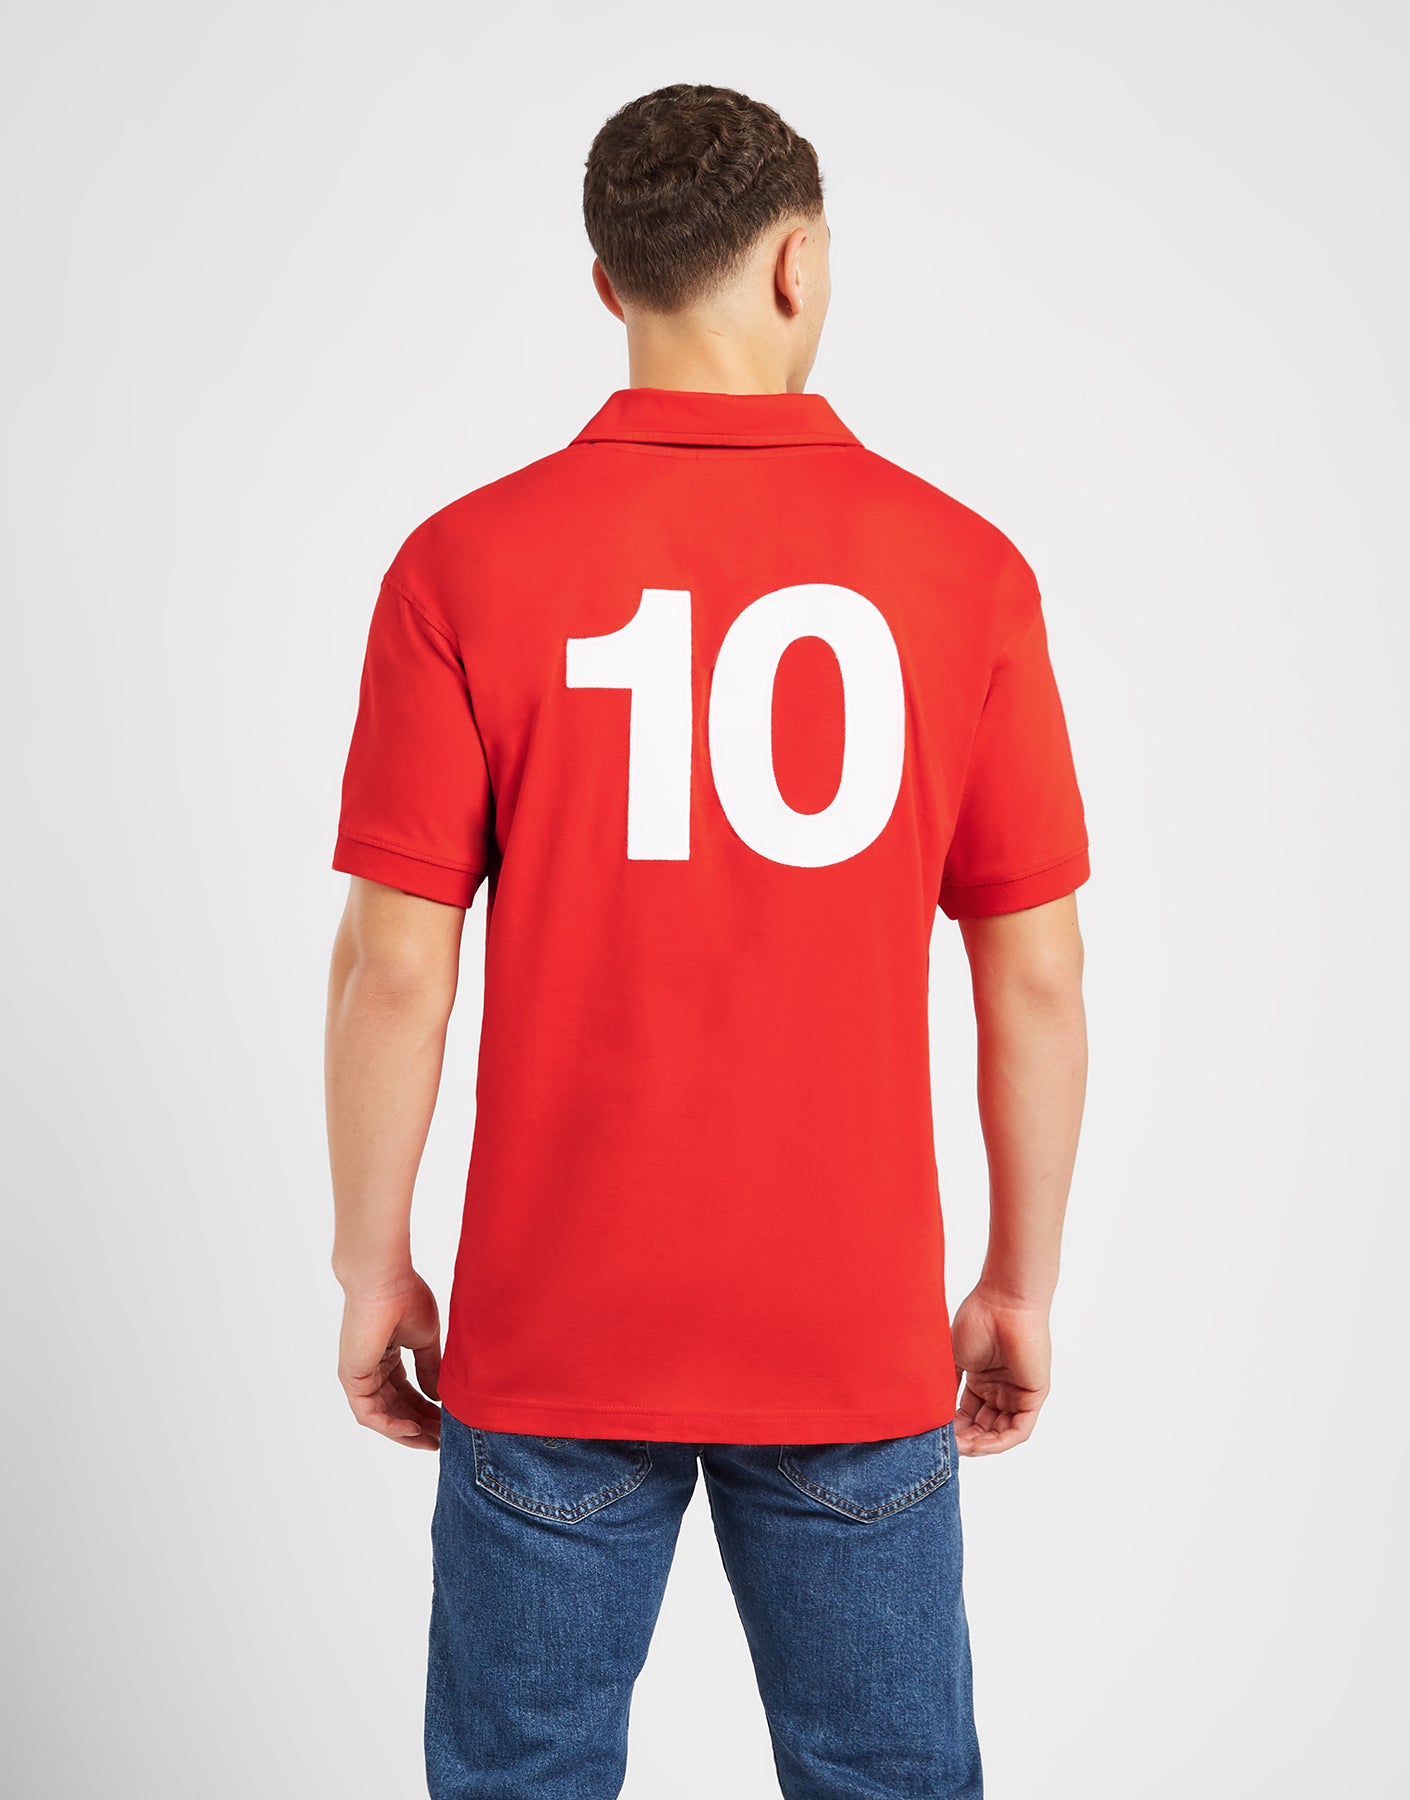 Official Team Wales 1976 Retro Jersey - Red